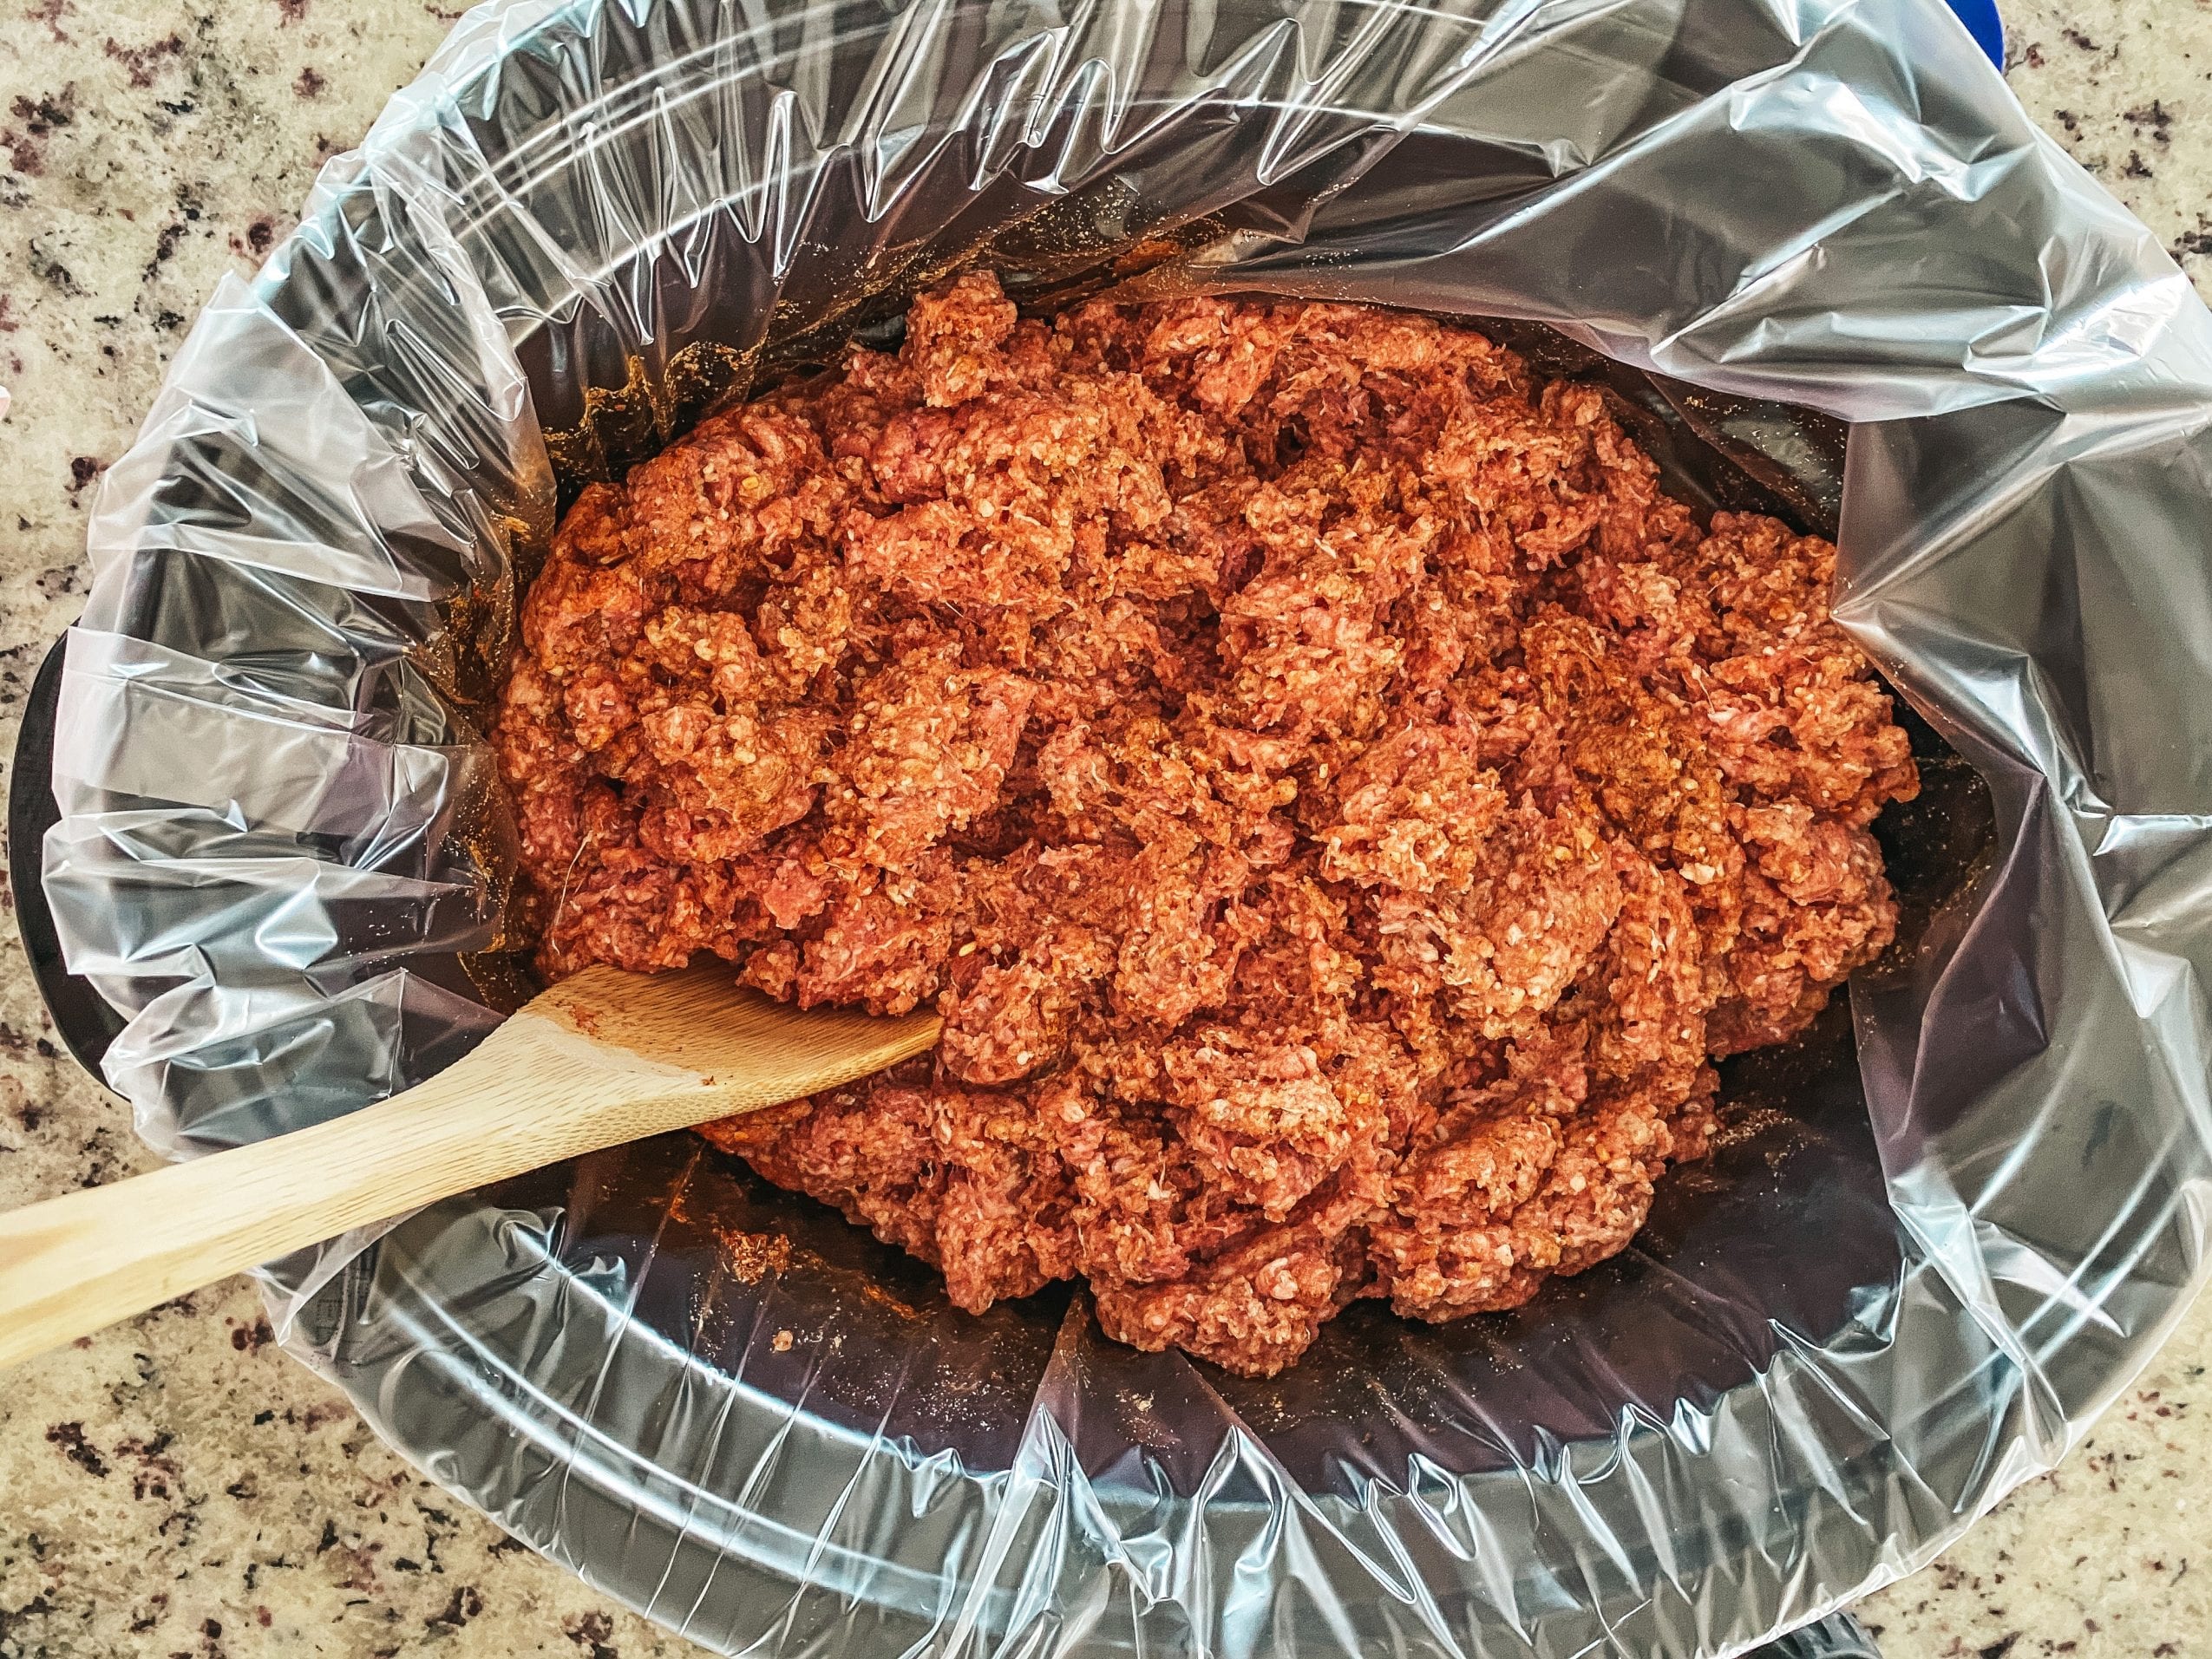 Mixed in taco seasoning into ground beef